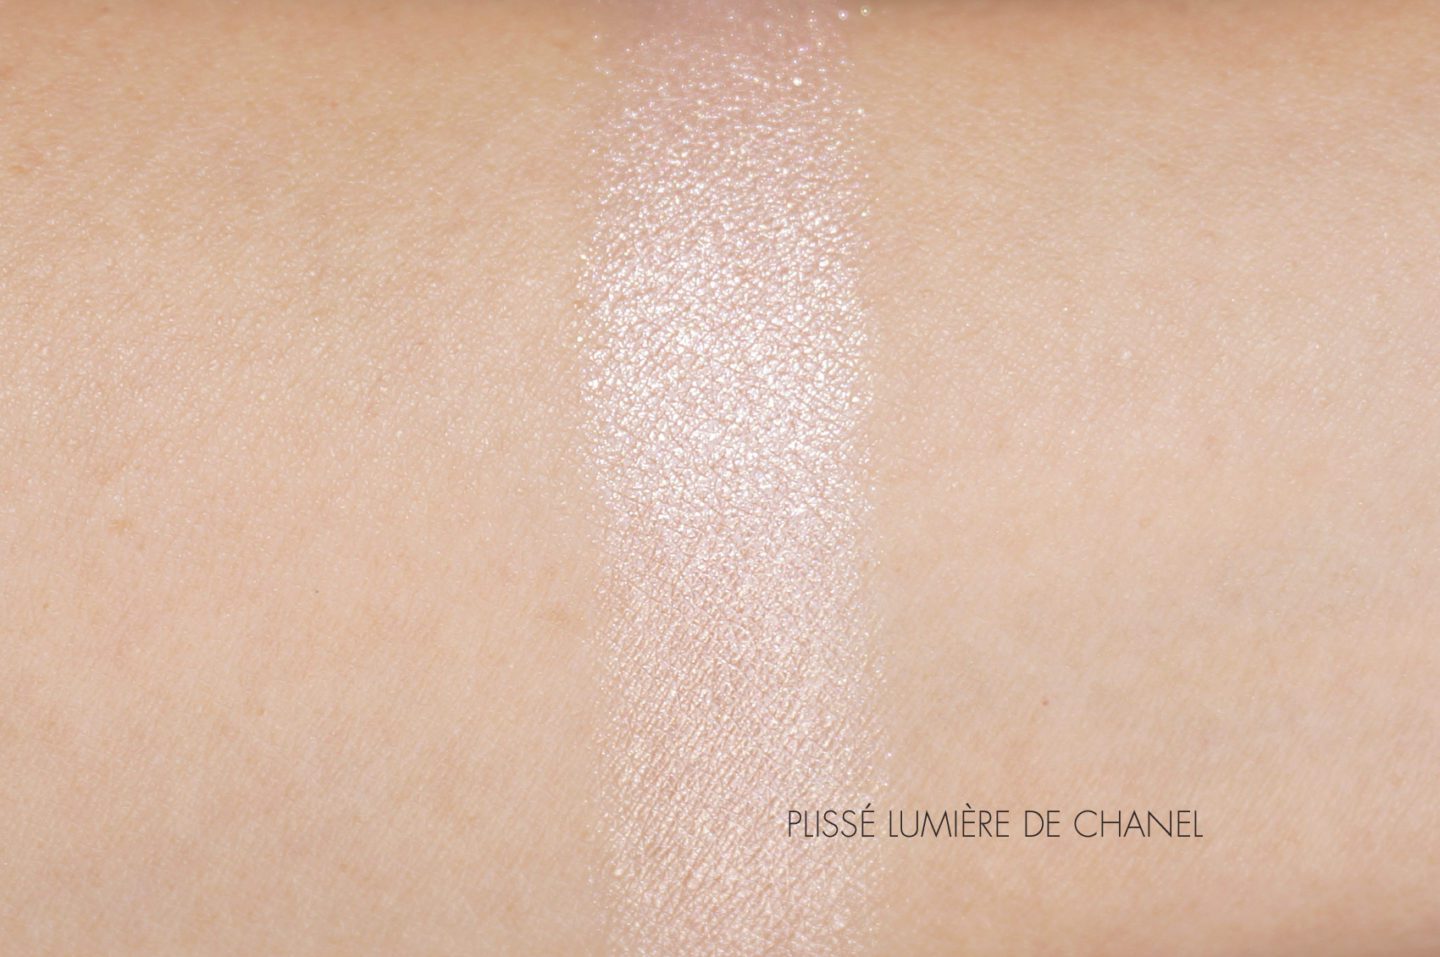 Chanel Plisse Lumiere de Chanel swatches | The Beauty Look Book